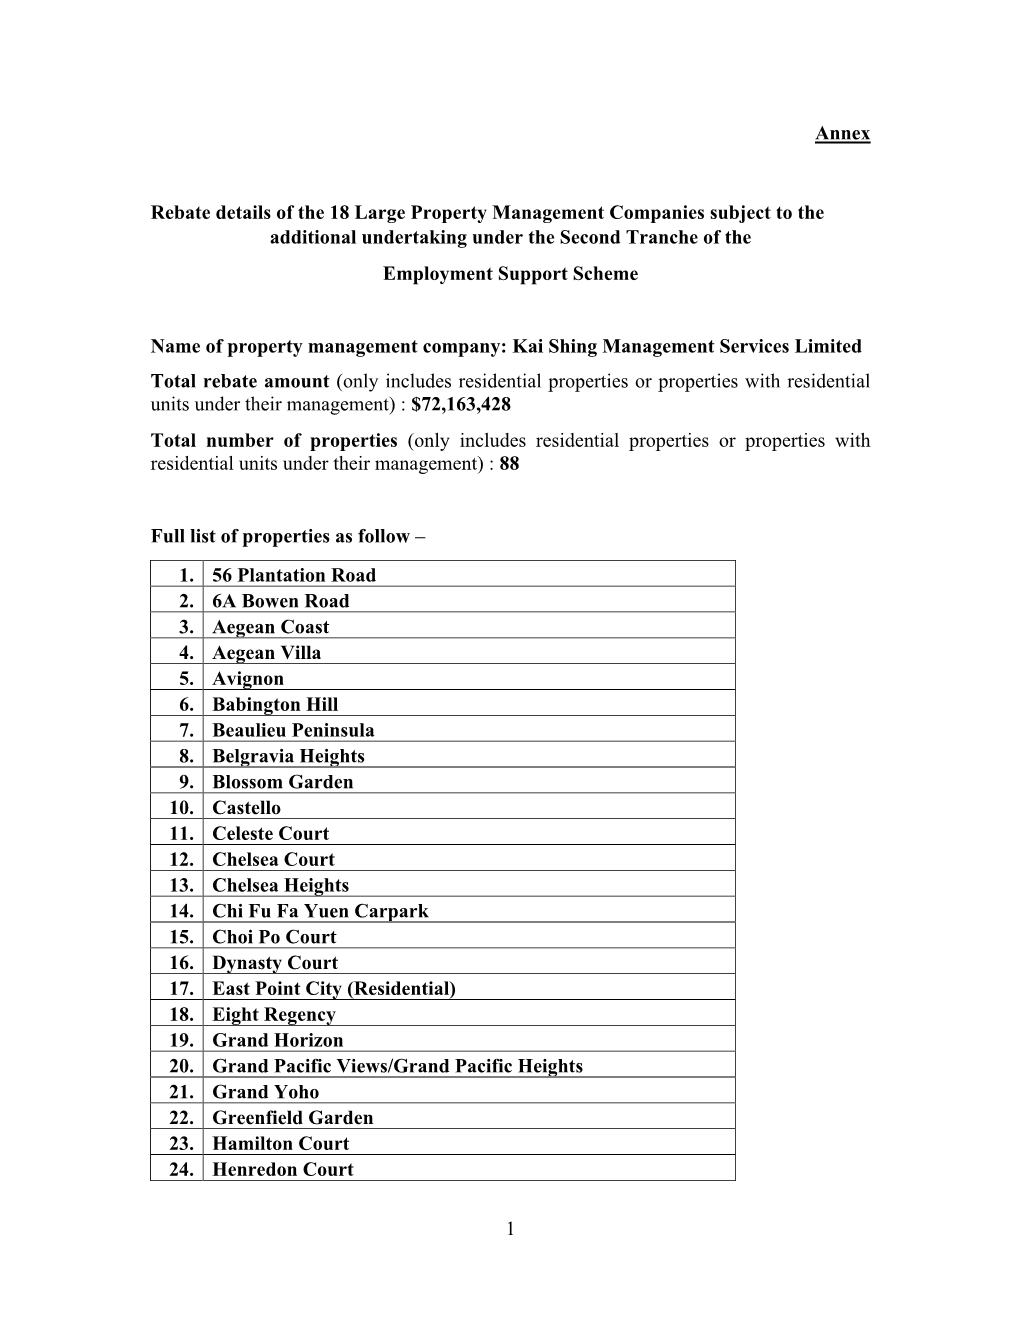 Rebate Details of the 18 Large Property Management Companies Subject to the Additional Undertaking Under the Second Tranche of the Employment Support Scheme